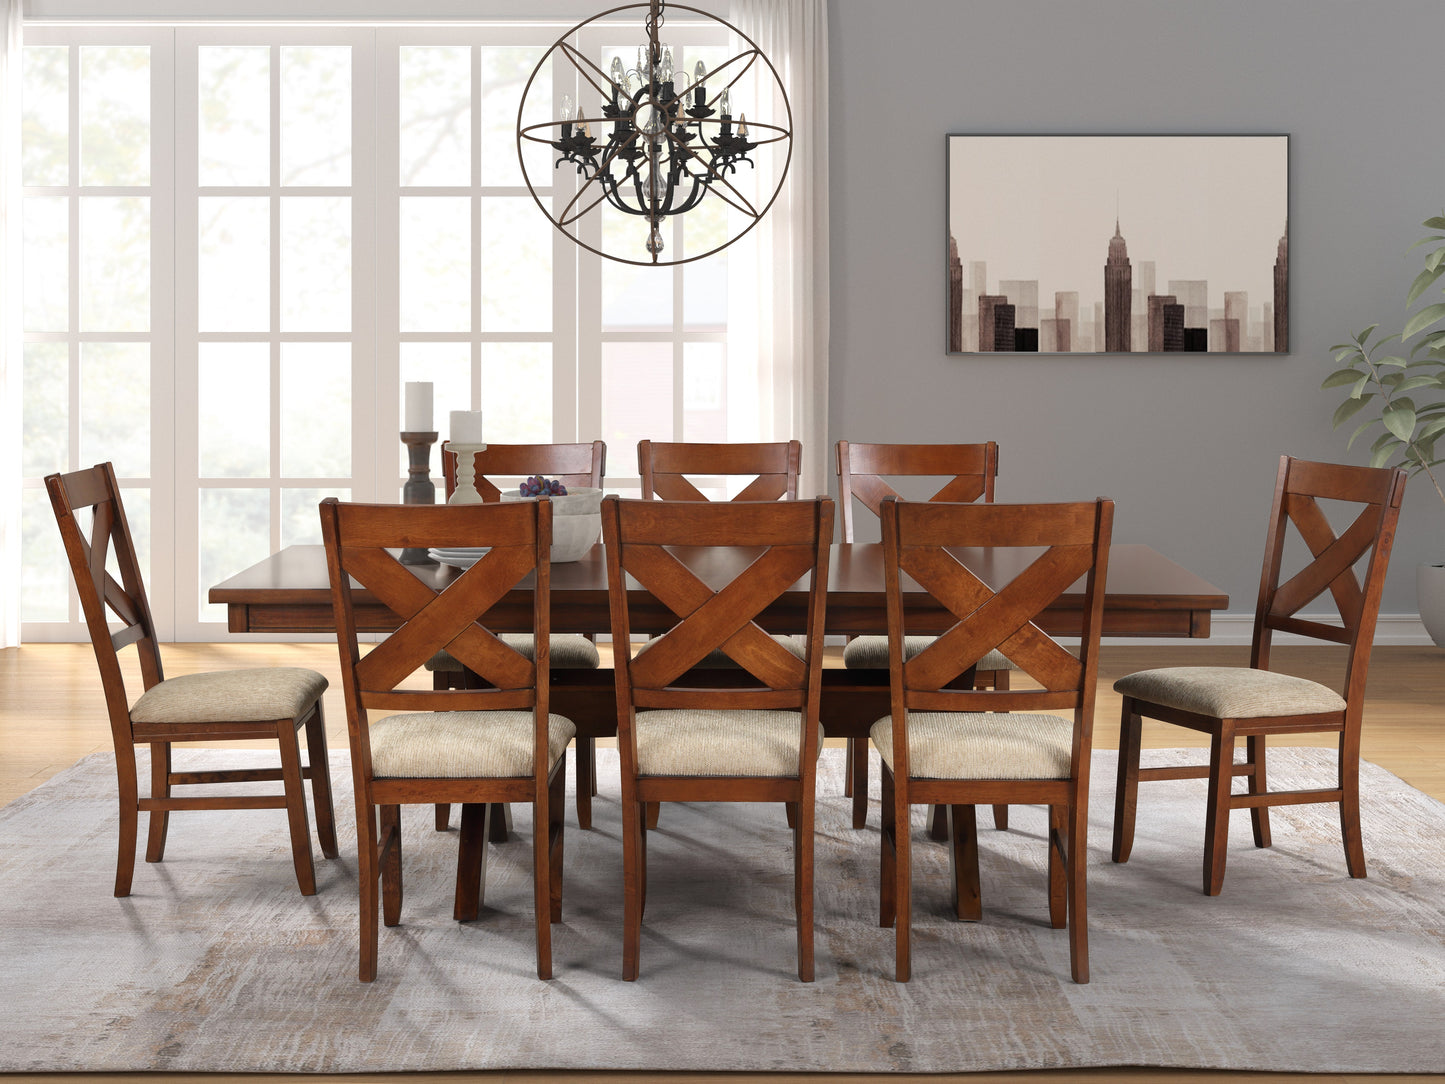 Karven Wood 9-Piece Dining Set, Extendable Trestle Dining Table with 8 Chairs, Dark Hazelnut